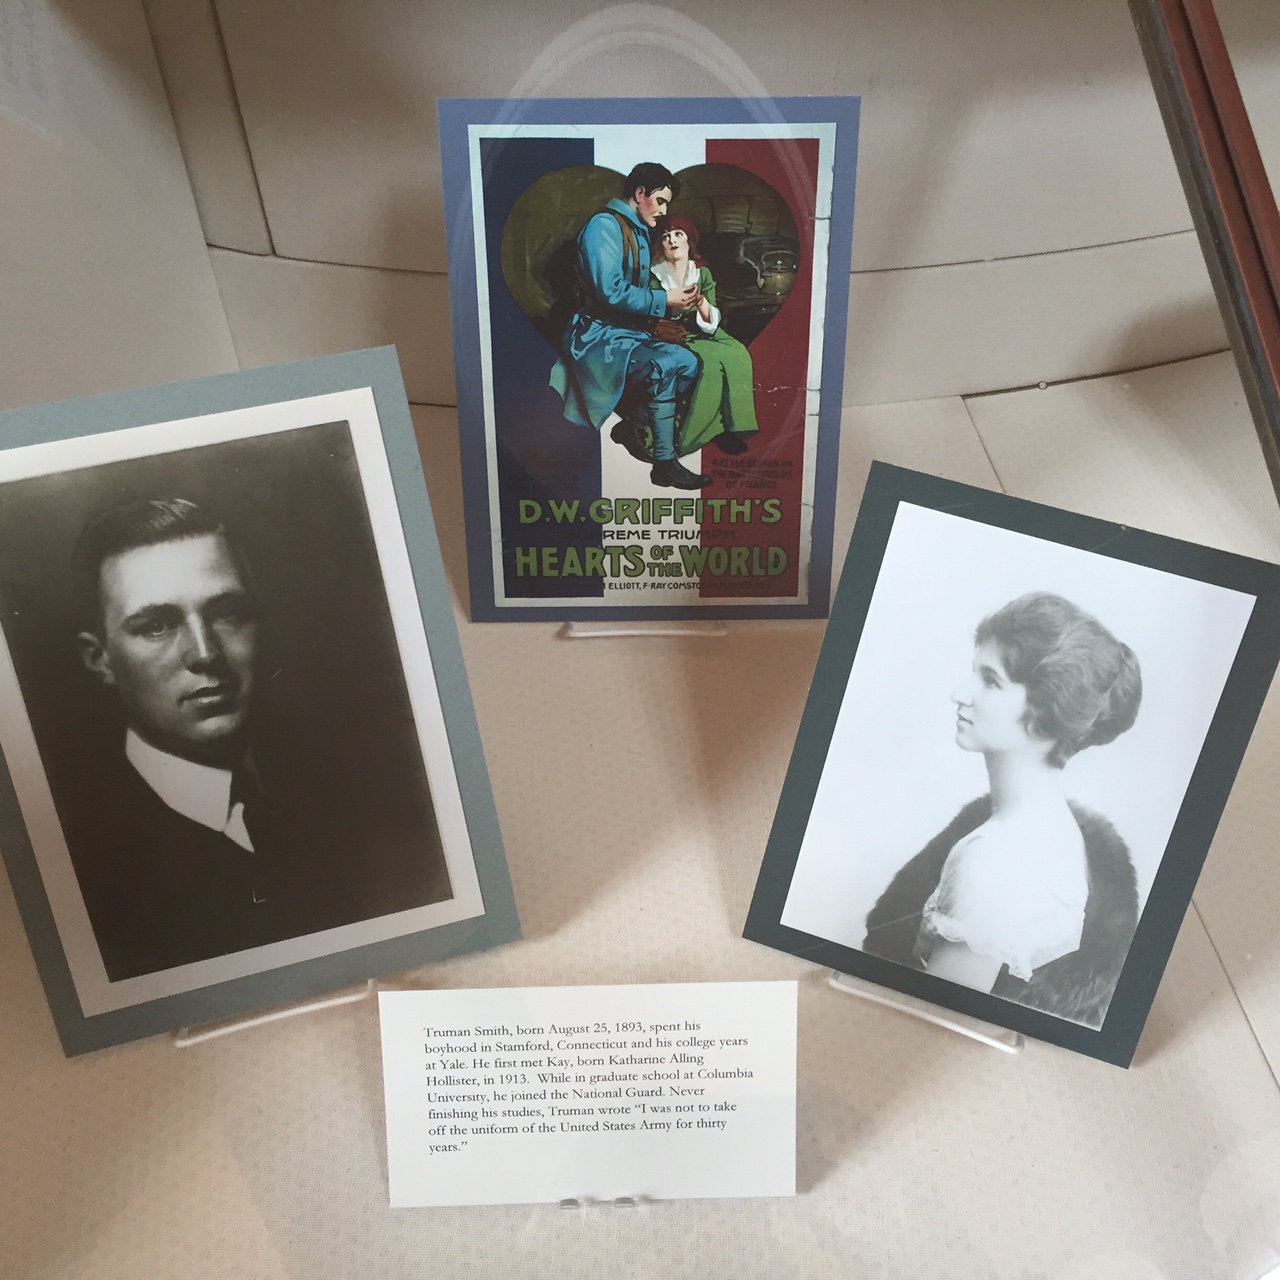 The new display in Hoover Tower features photographs of Truman Smith and his wife, Kay